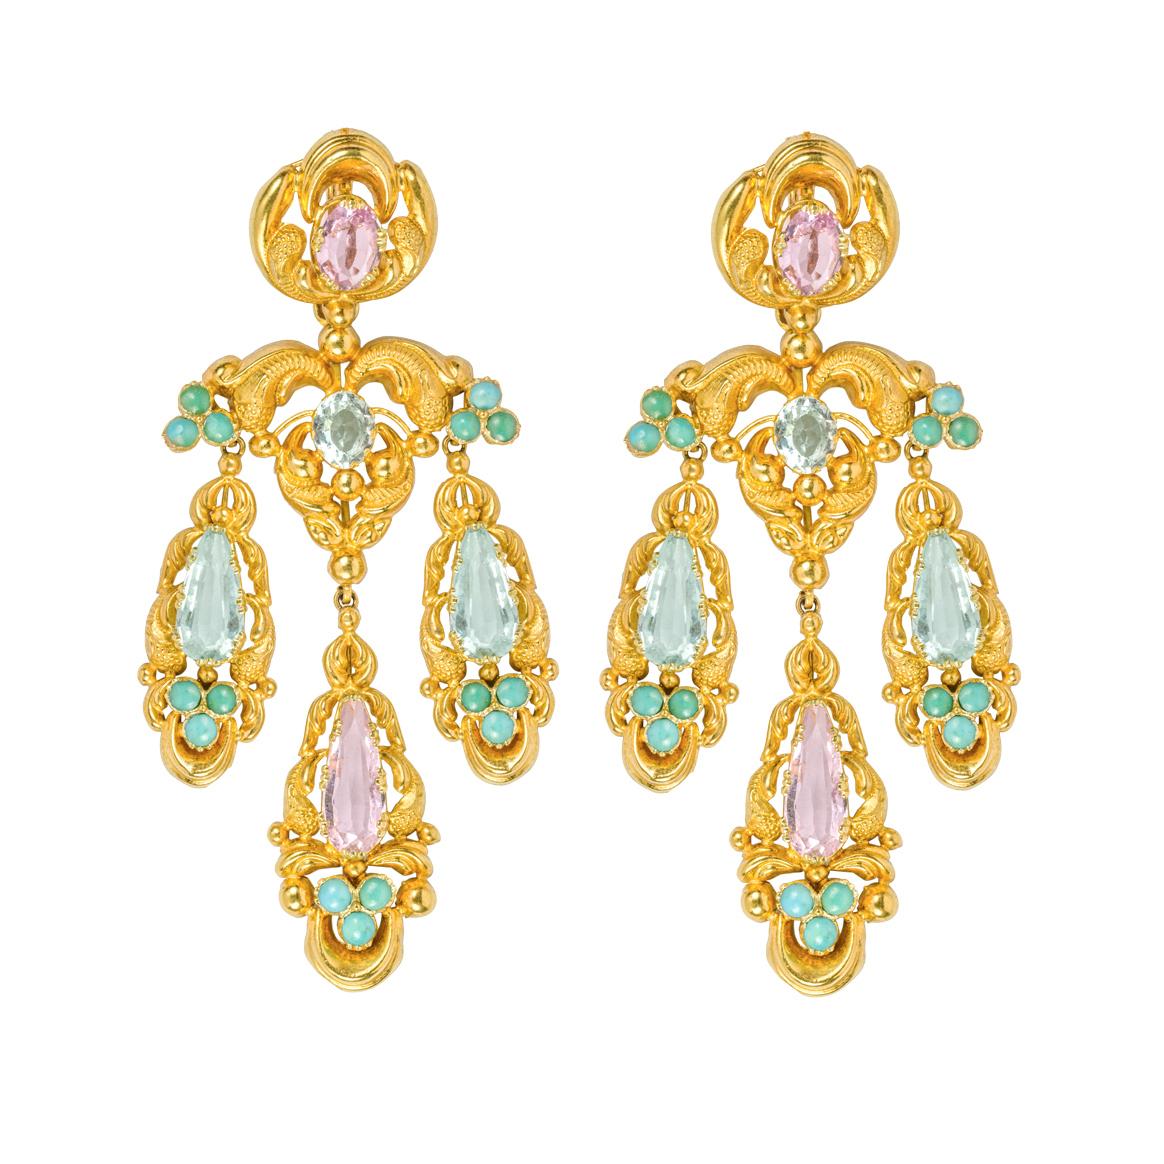 A late Georgian gold aquamarine, pink topaz and turquoise suite, consisting of a necklace, a pair of drop earrings and a bodice brooch, the necklace with ten lozenge shaped links each centrally set with a pink topaz surrounded by four oval